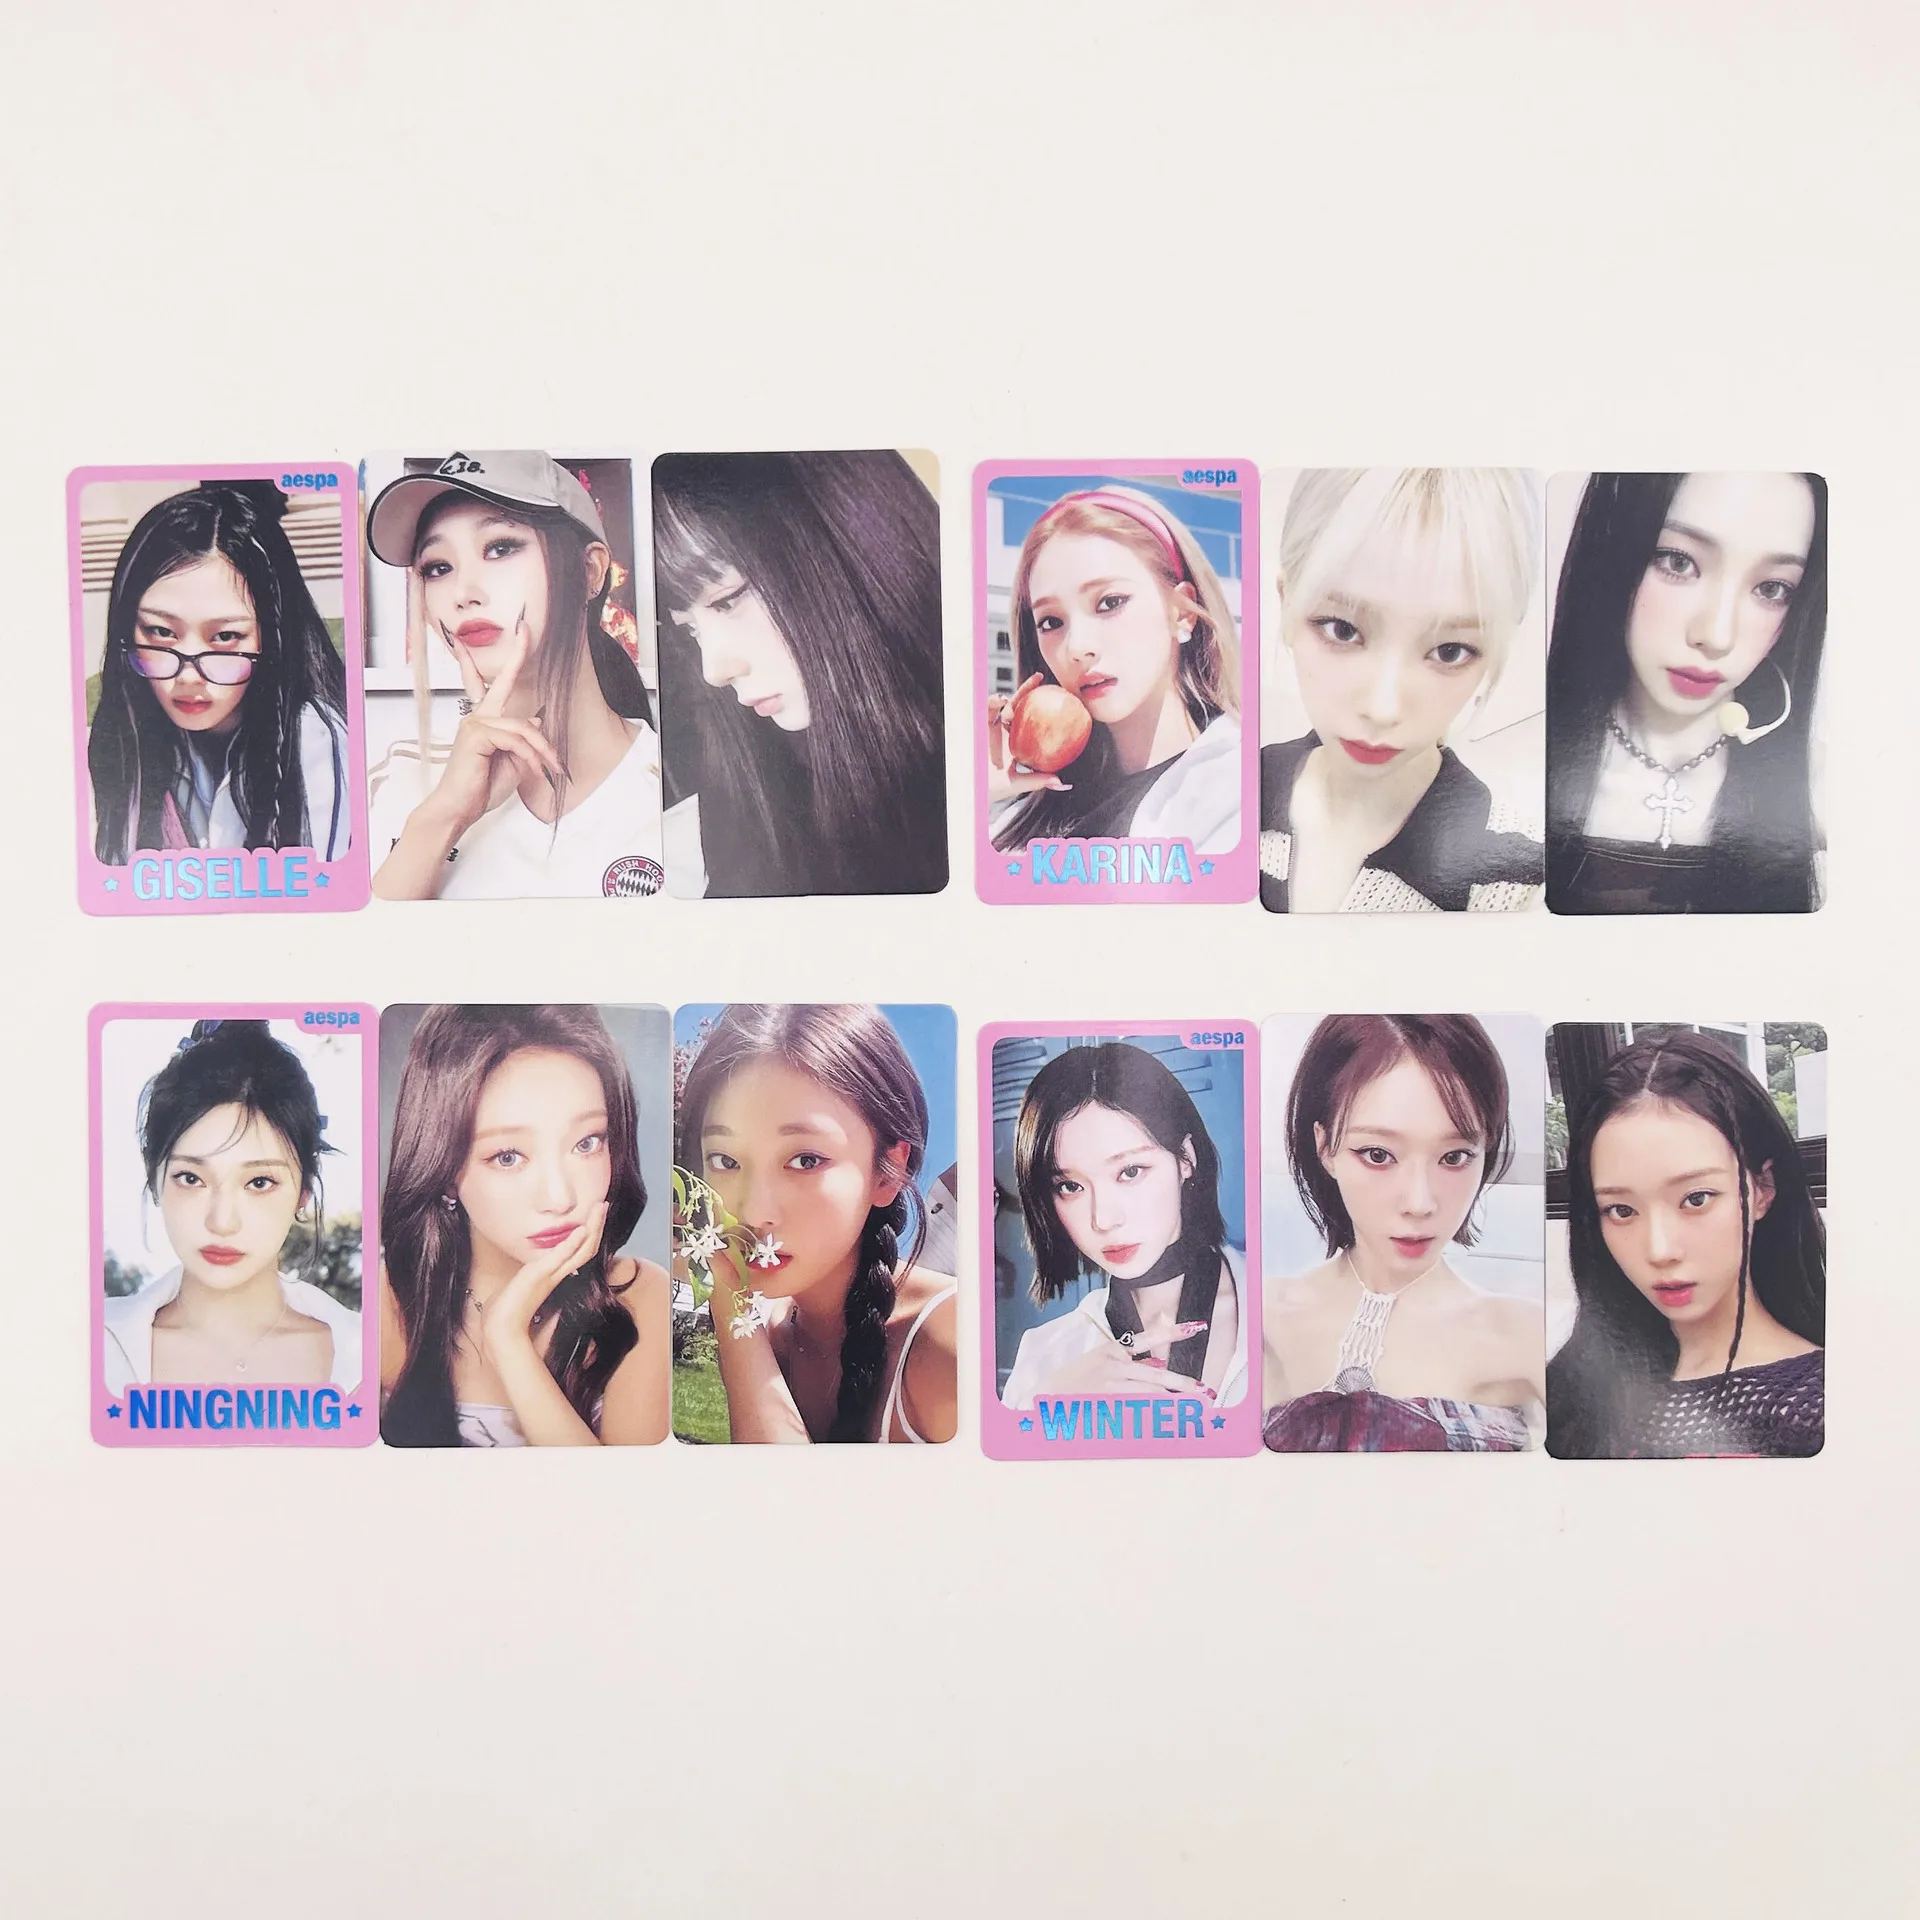 

KPOP AESPA Spicy Pop-UP Store Trading LOMO CARDS 3pcs Double Sided Selfie Photocards WINTER Karina Giselle Fans Gifts